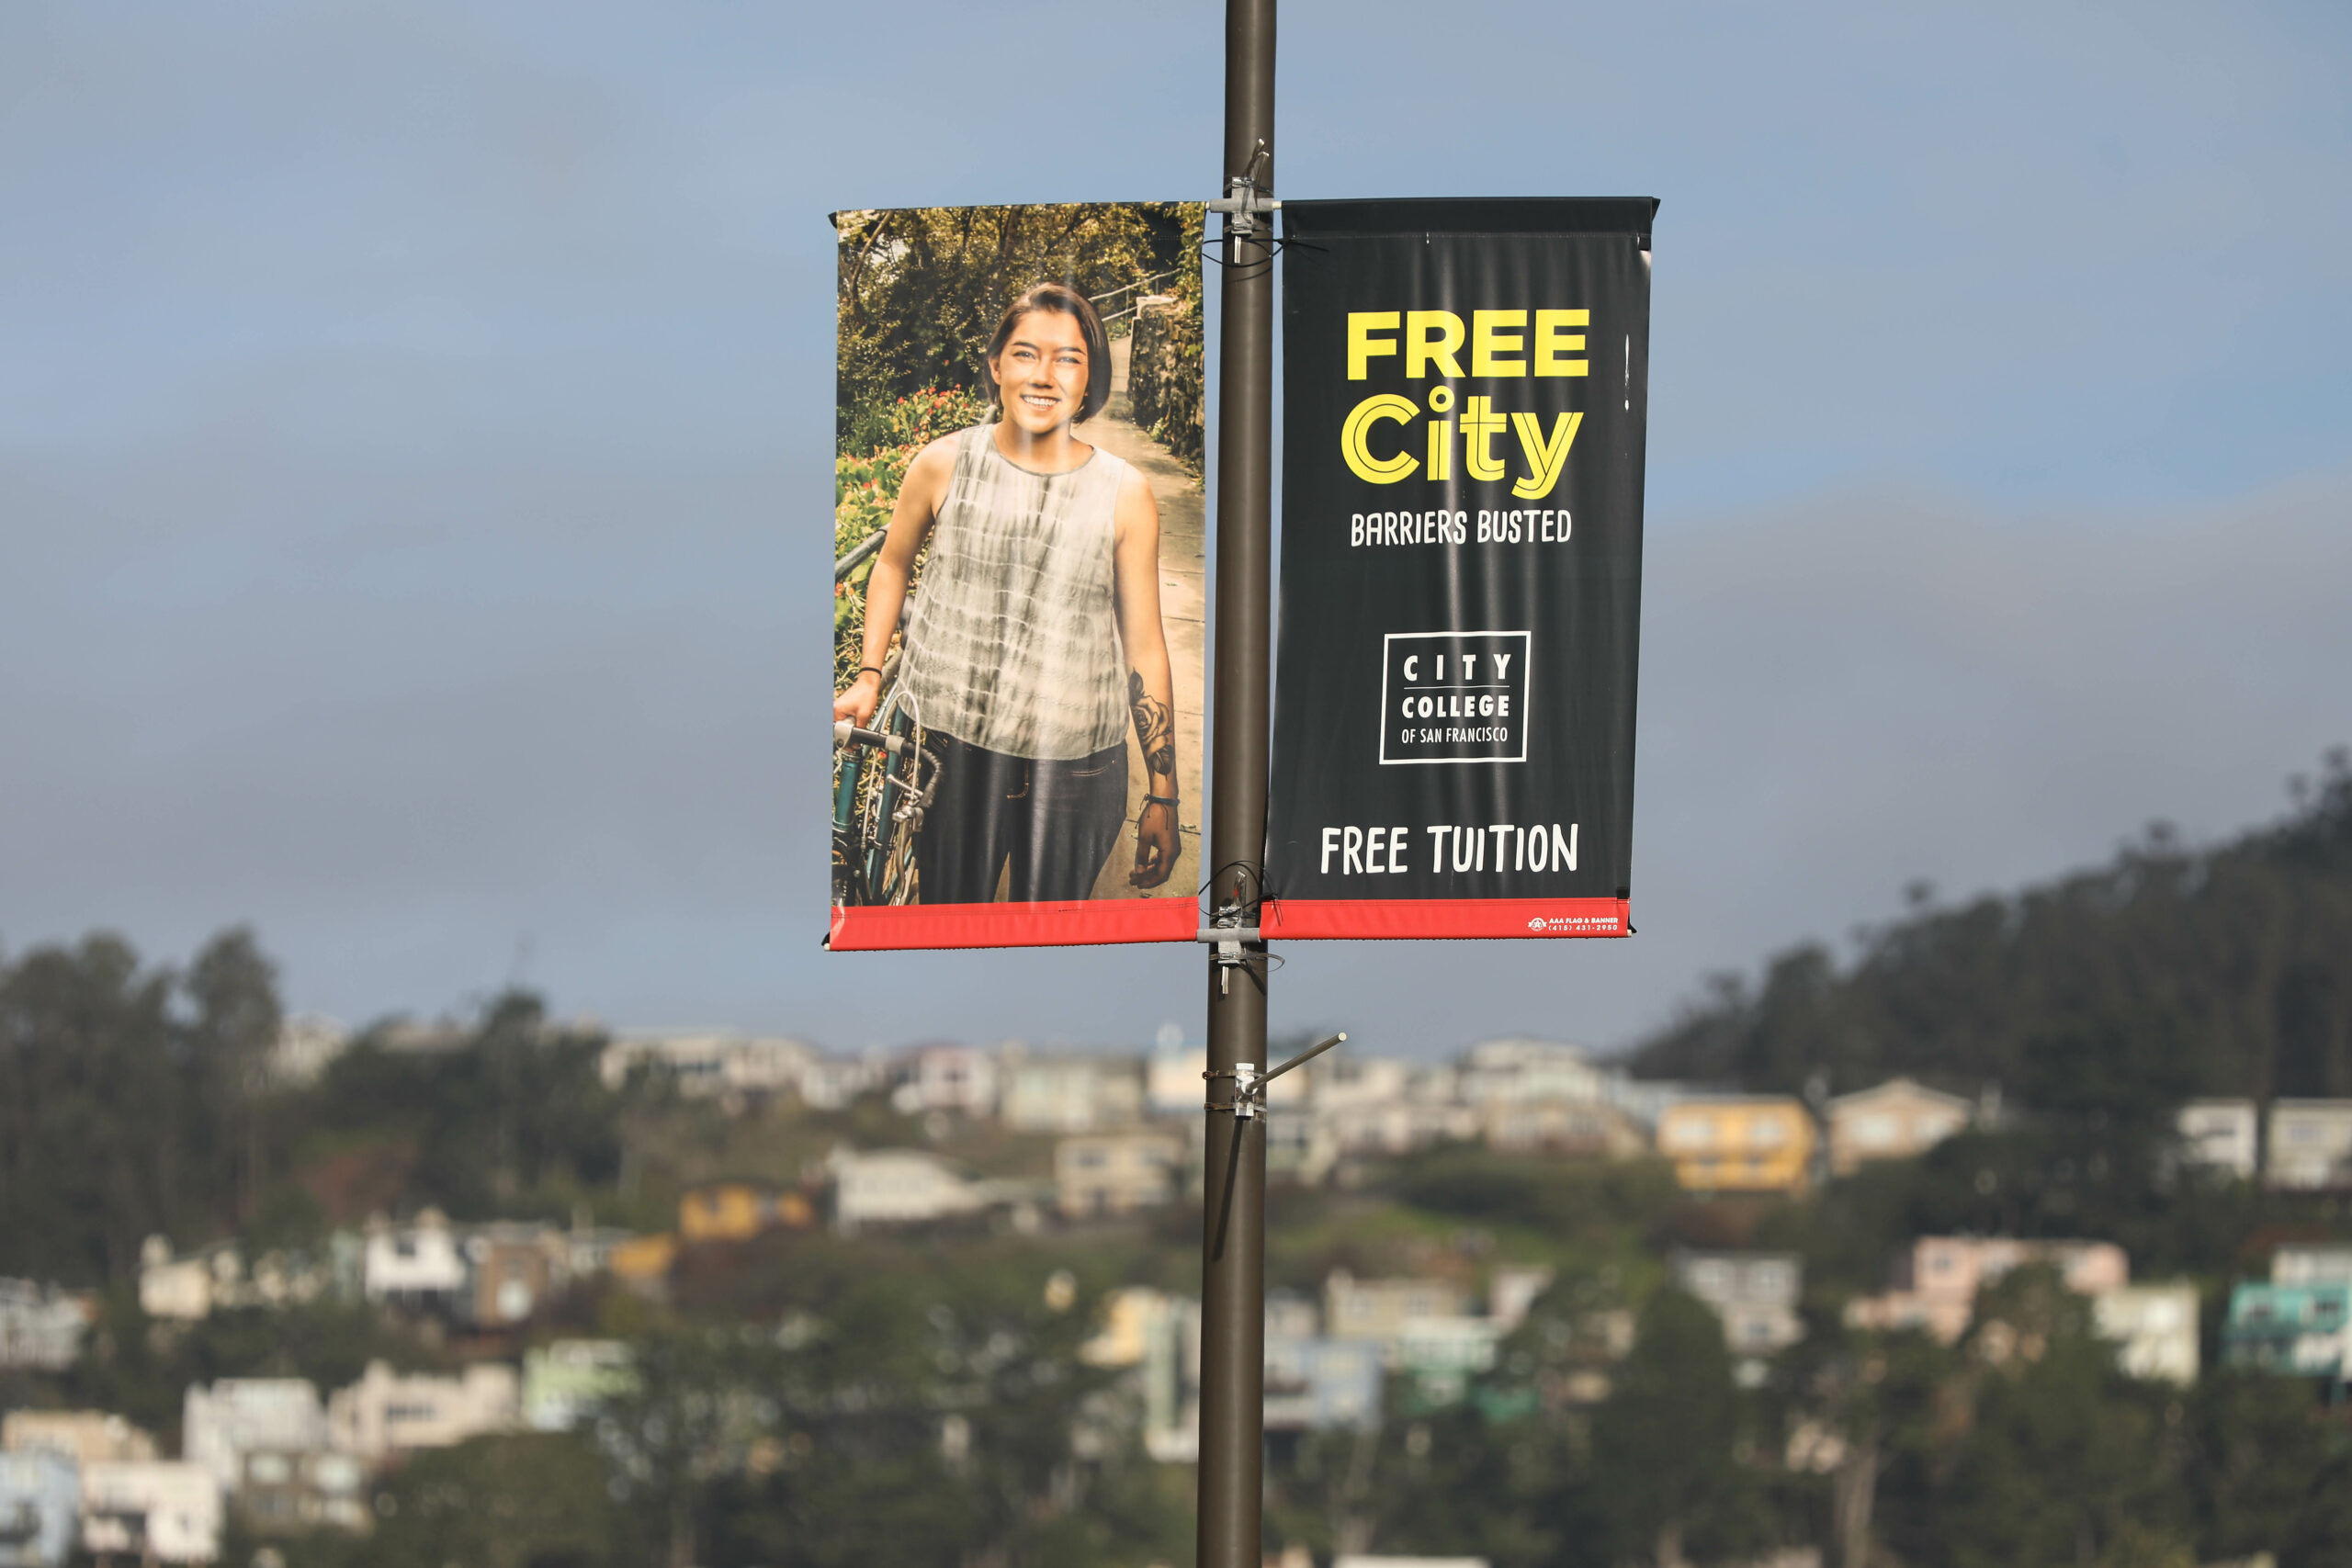 Will This New Tax Save SF’s Free City College?